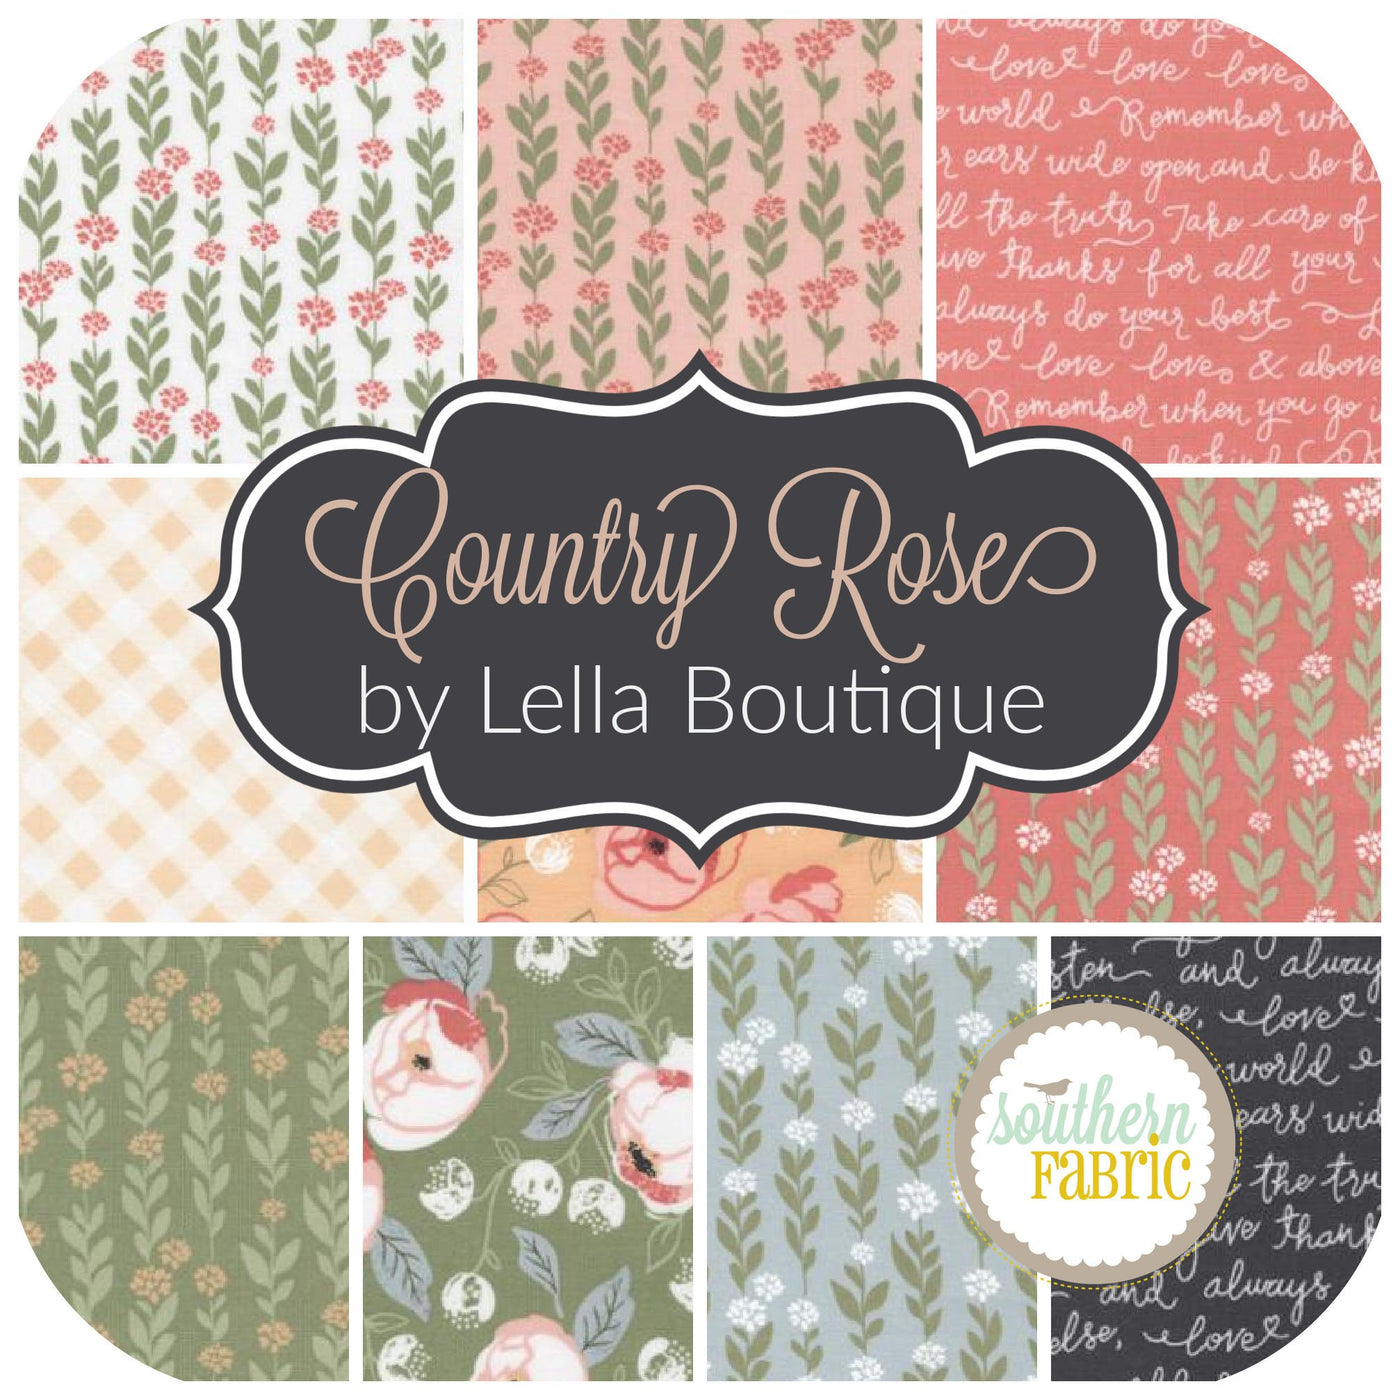 Country Rose Scrap Bag (approx 2 yards) by Lella Boutique for Southern Fabric (LB.CR.SB)